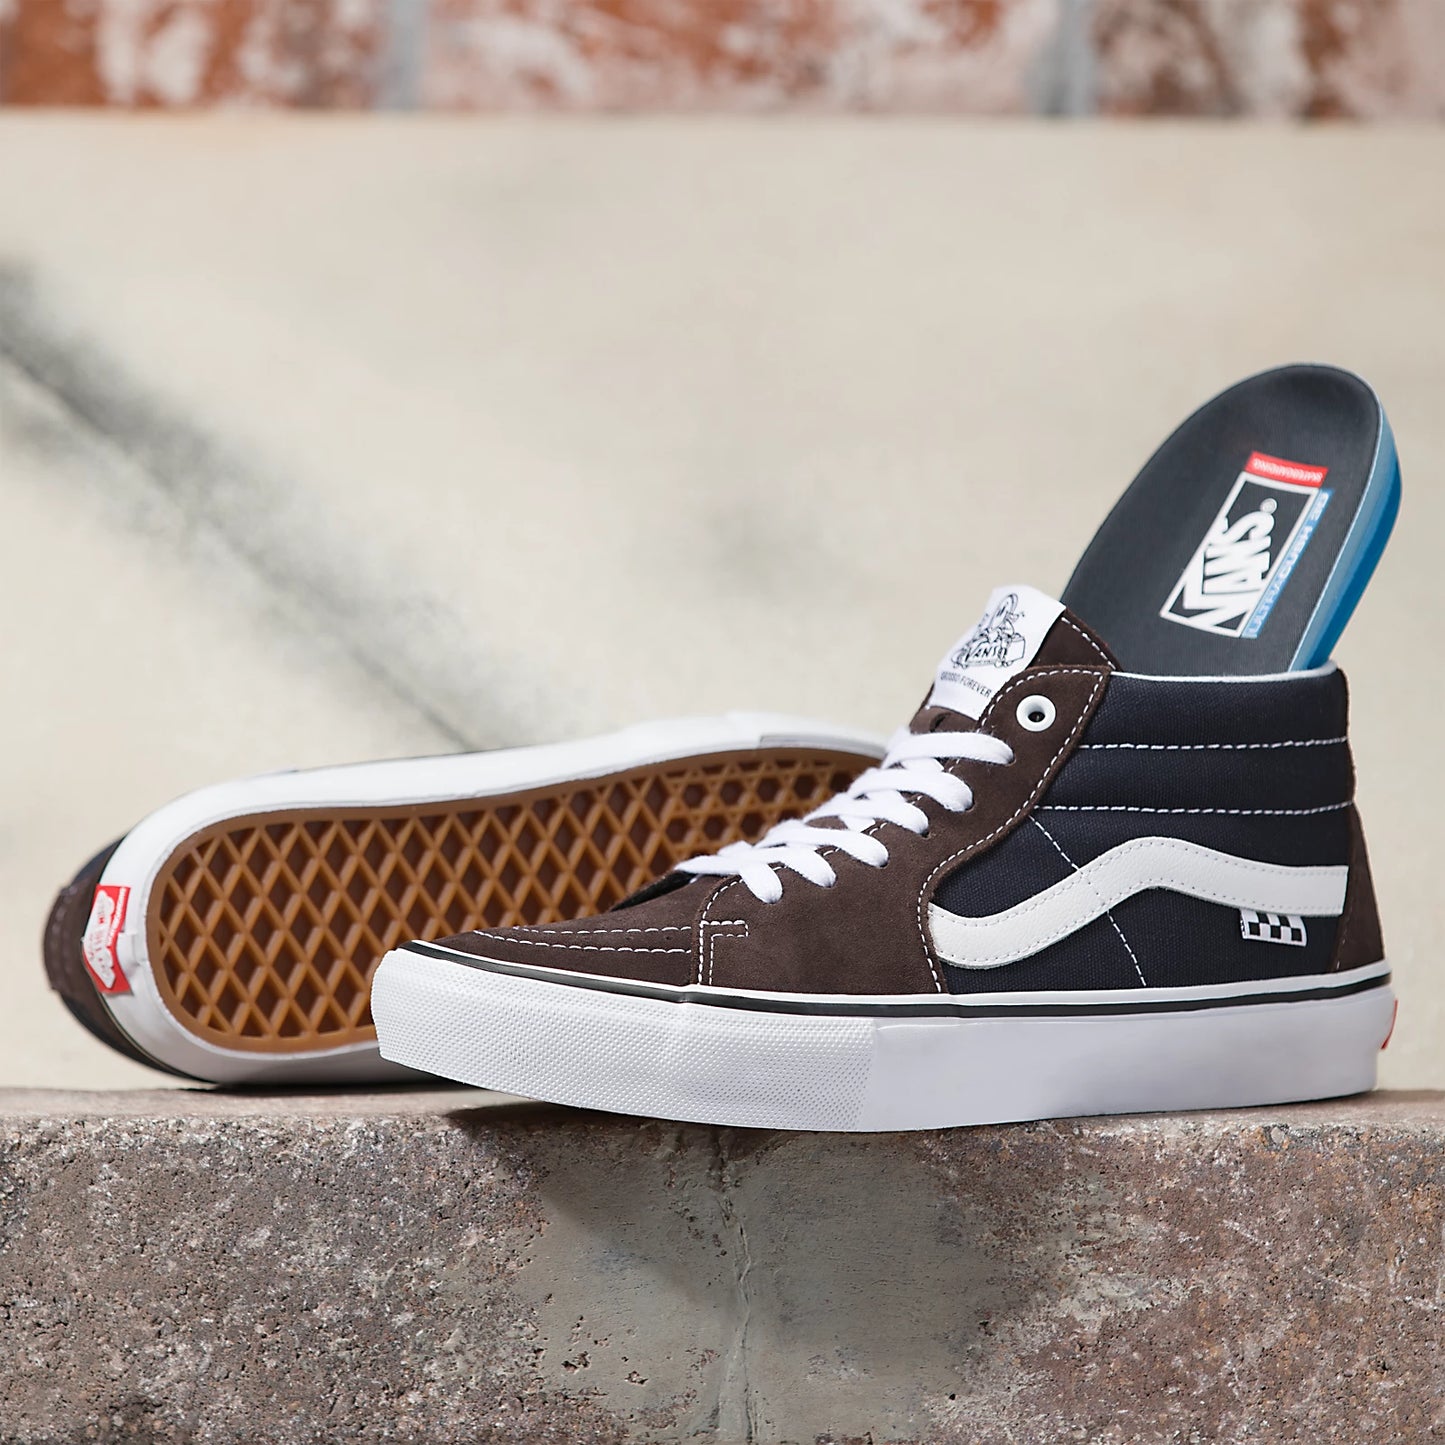 Skate Grosso Mid Pro Shoe Brwn/Nvy(size options listed)